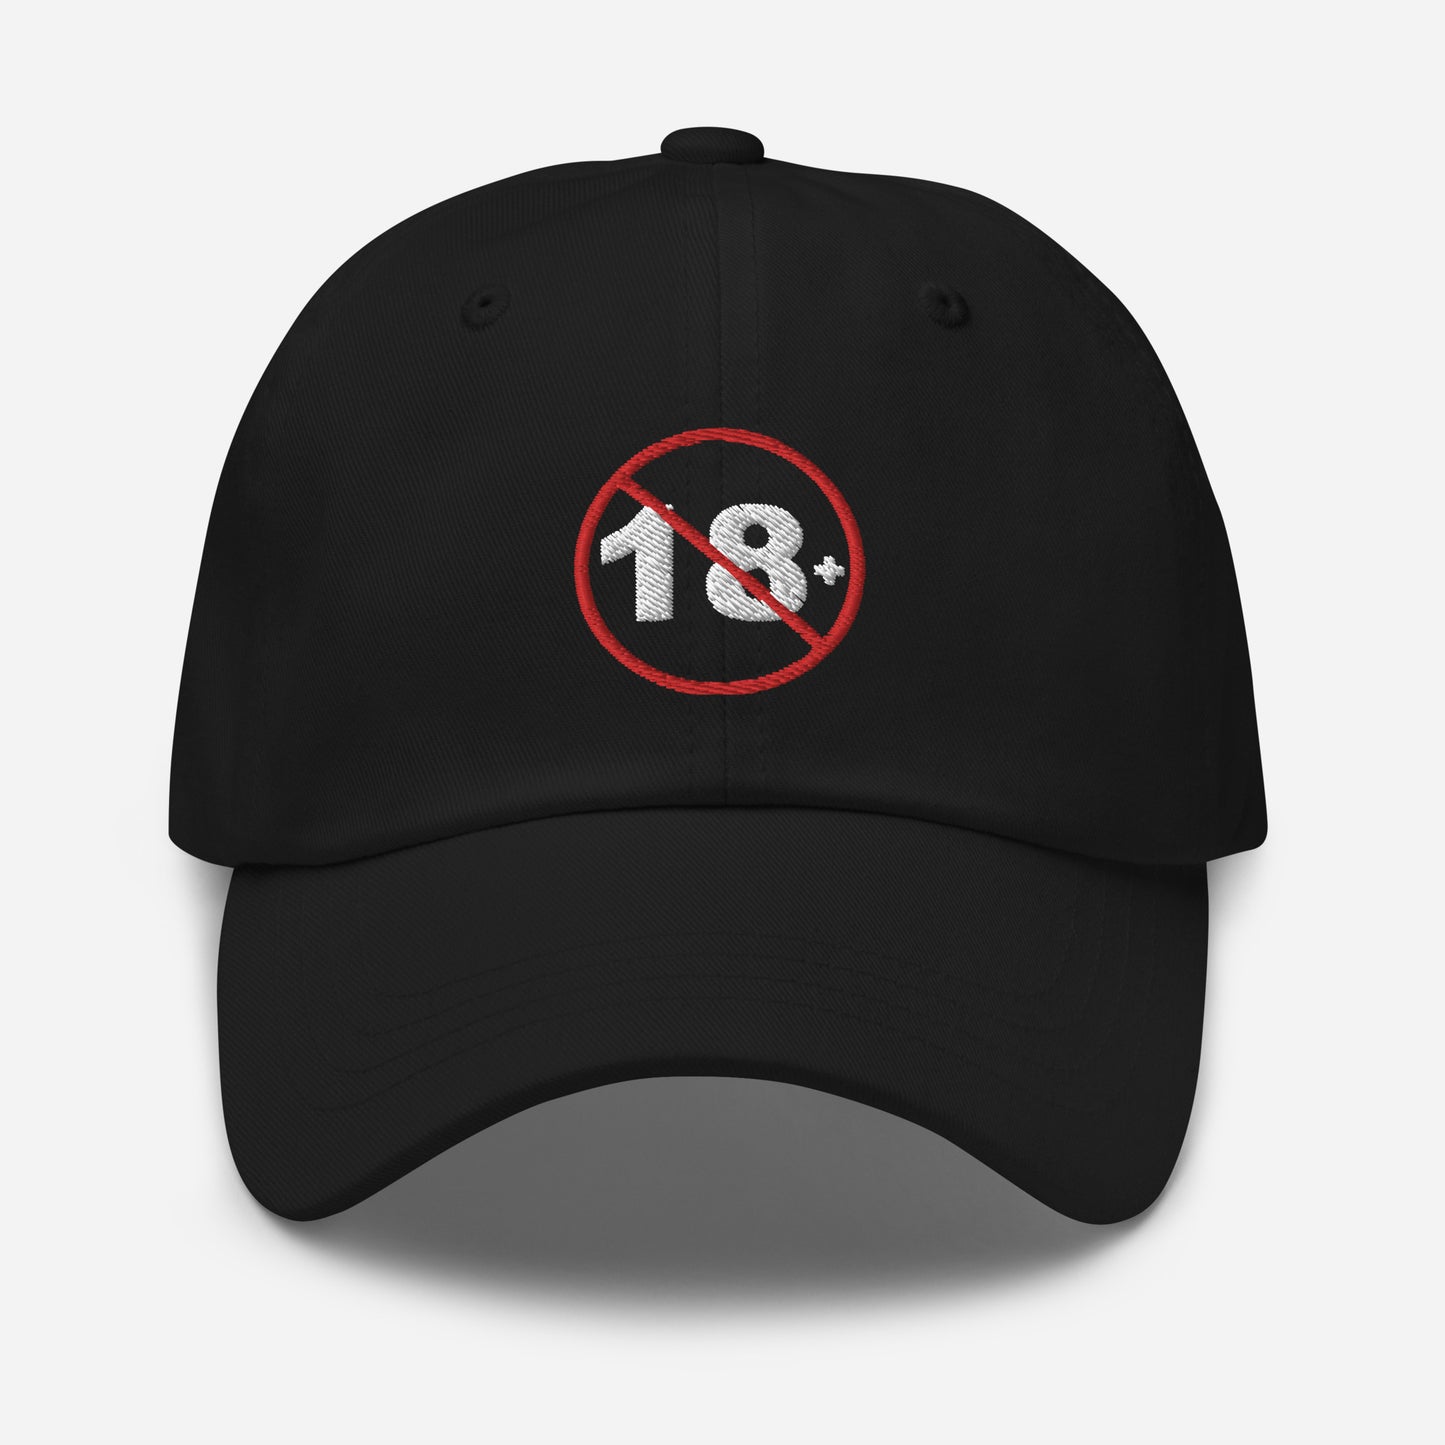 18+ ONLY Dad hat